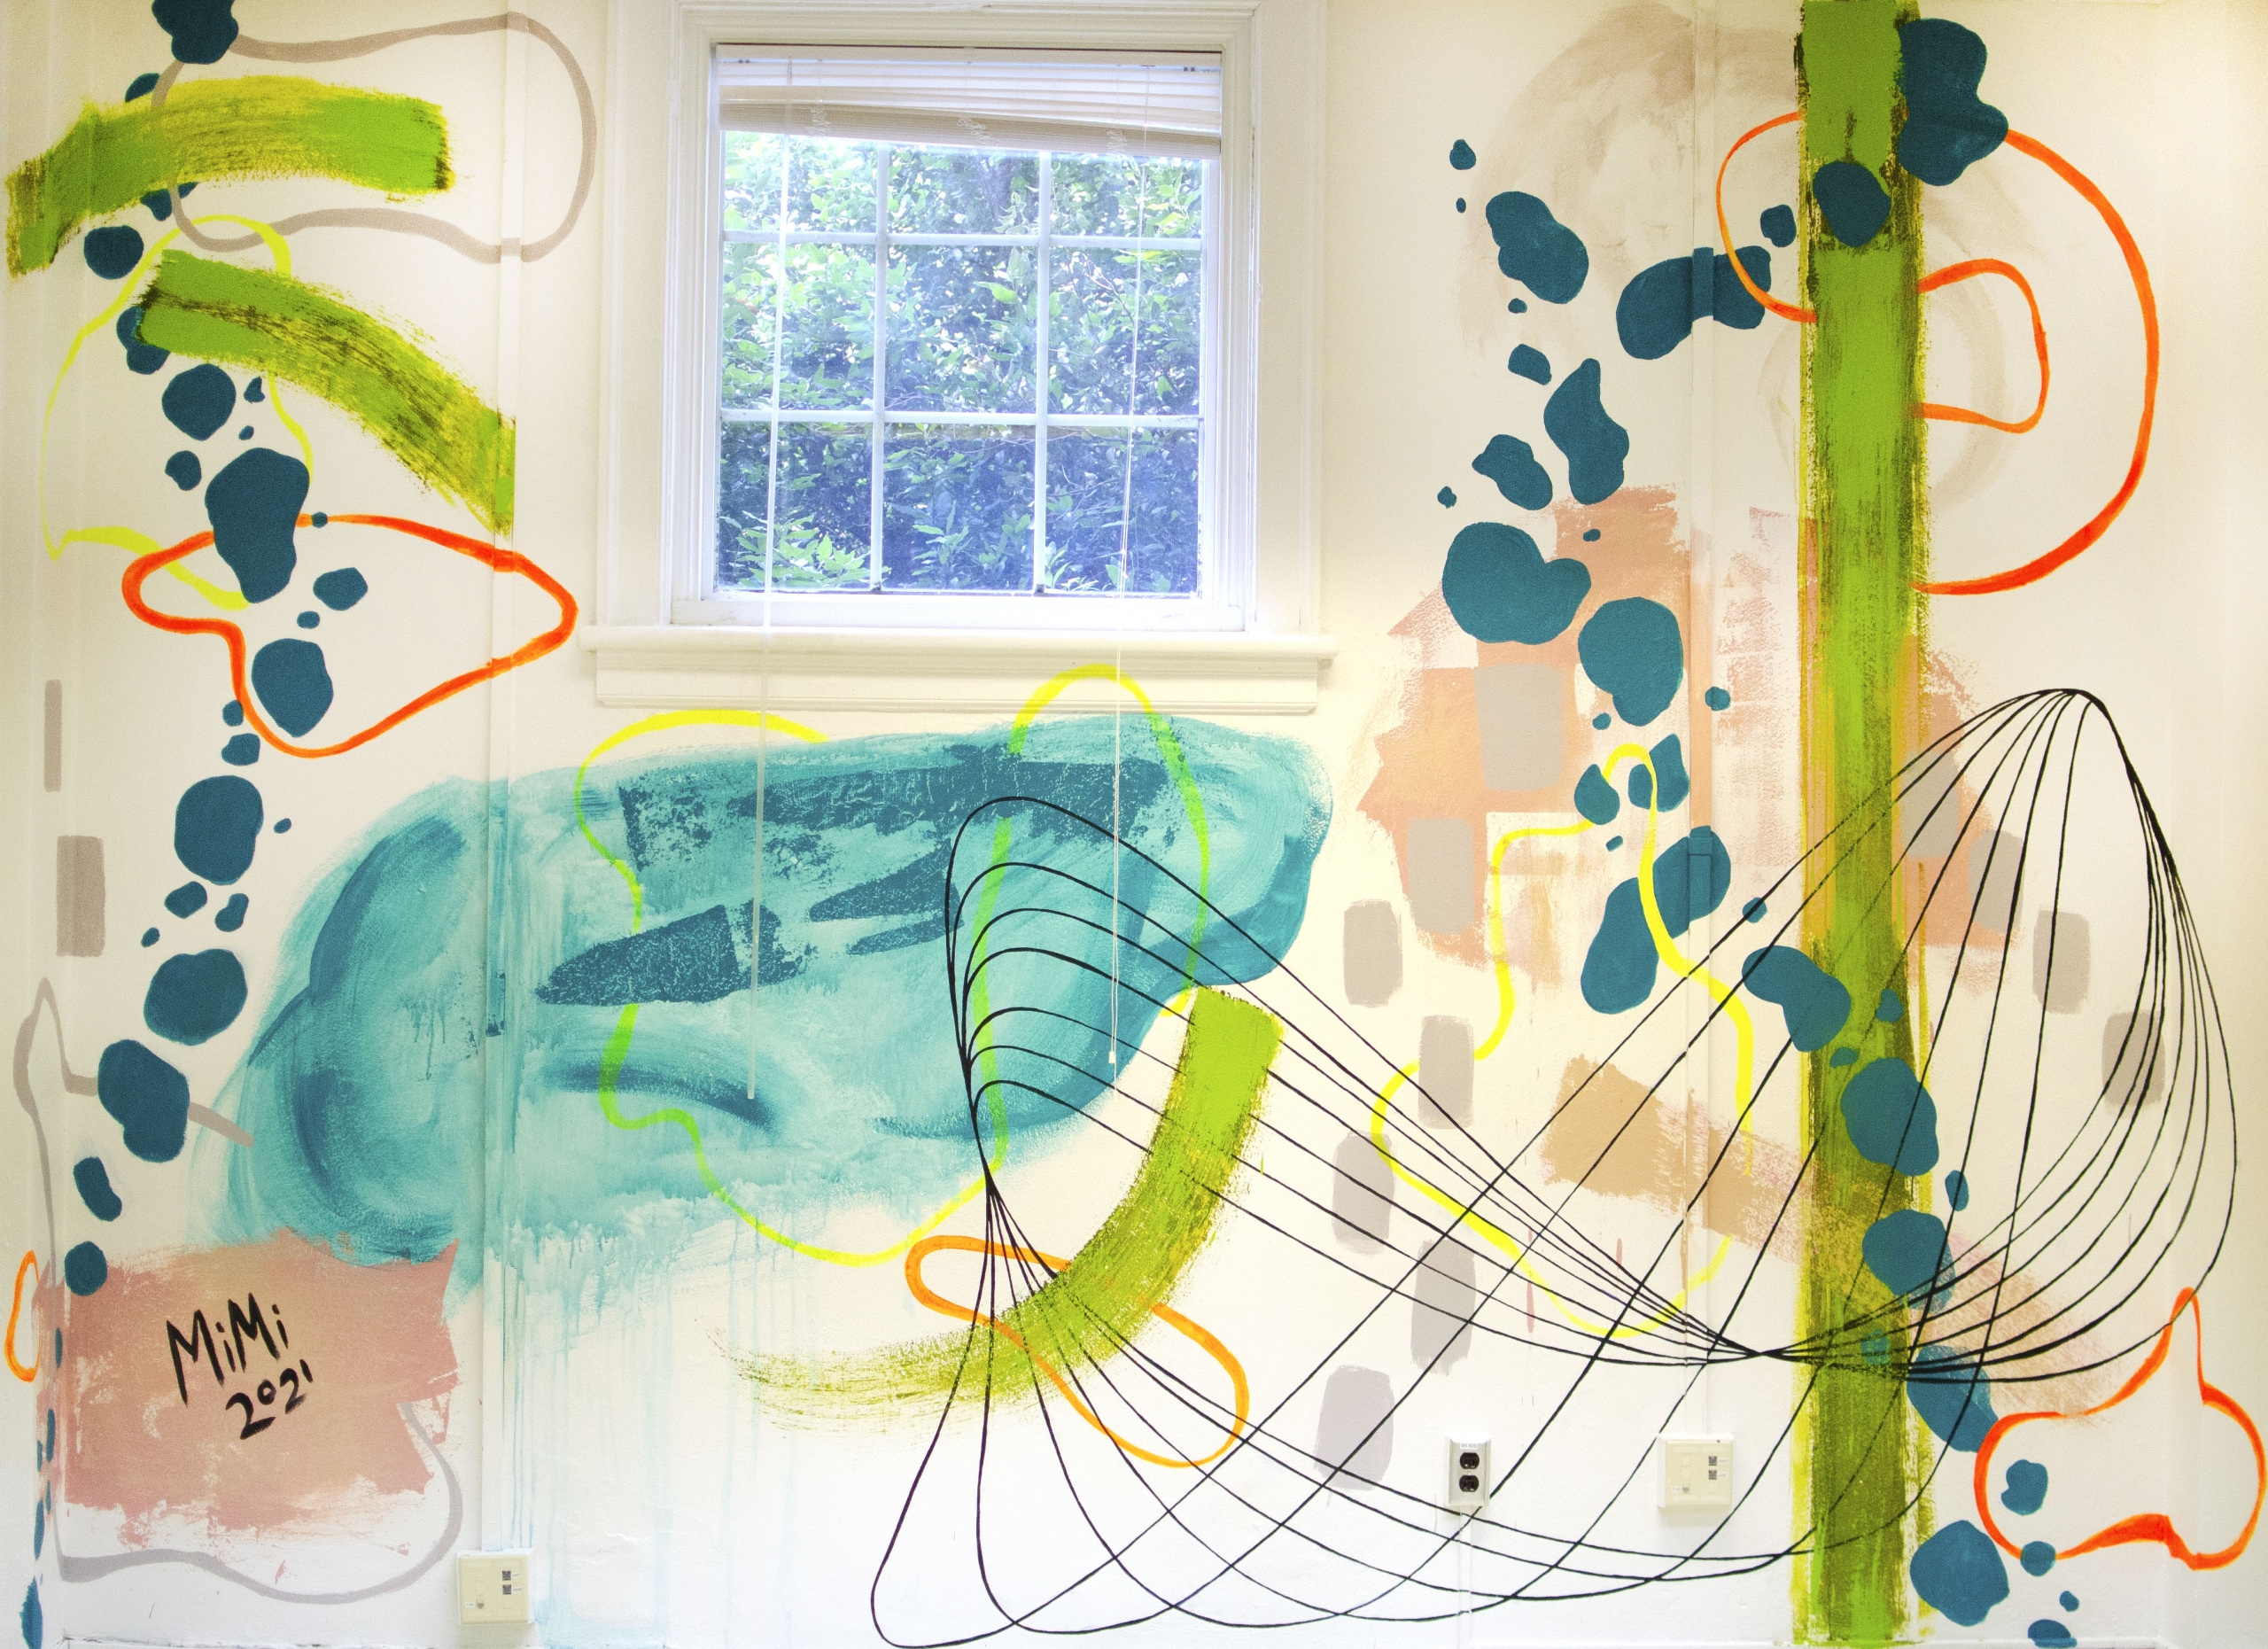 Full oscillation mural with abstract shapes and lines